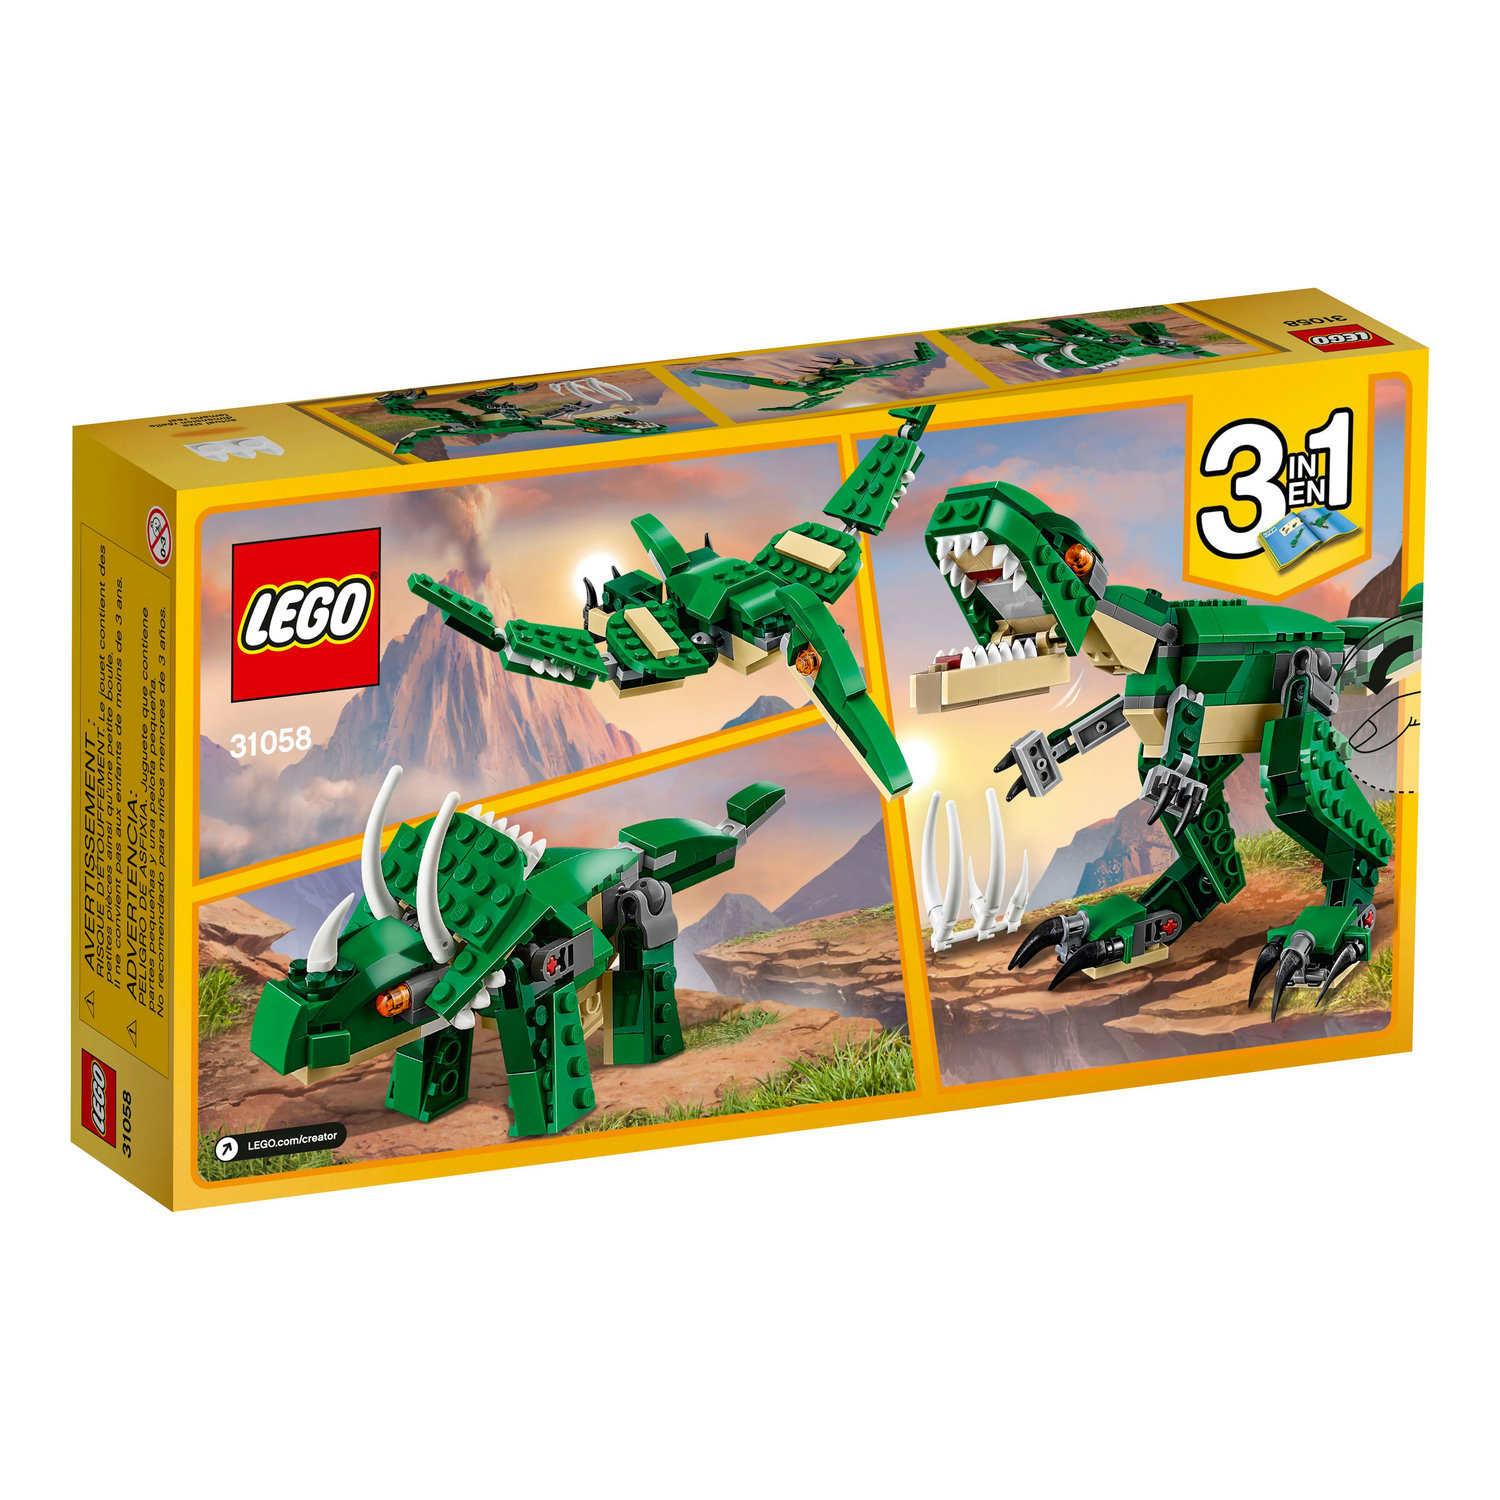 LEGO Creator 3 in 1 Mighty Dinosaur Toy, Transforms from T. rex to Triceratops to Pterodactyl Dinosaur Figures, Great Gift for 7 - 12 Year Old Boys & Girls, 31058 - image 3 of 4